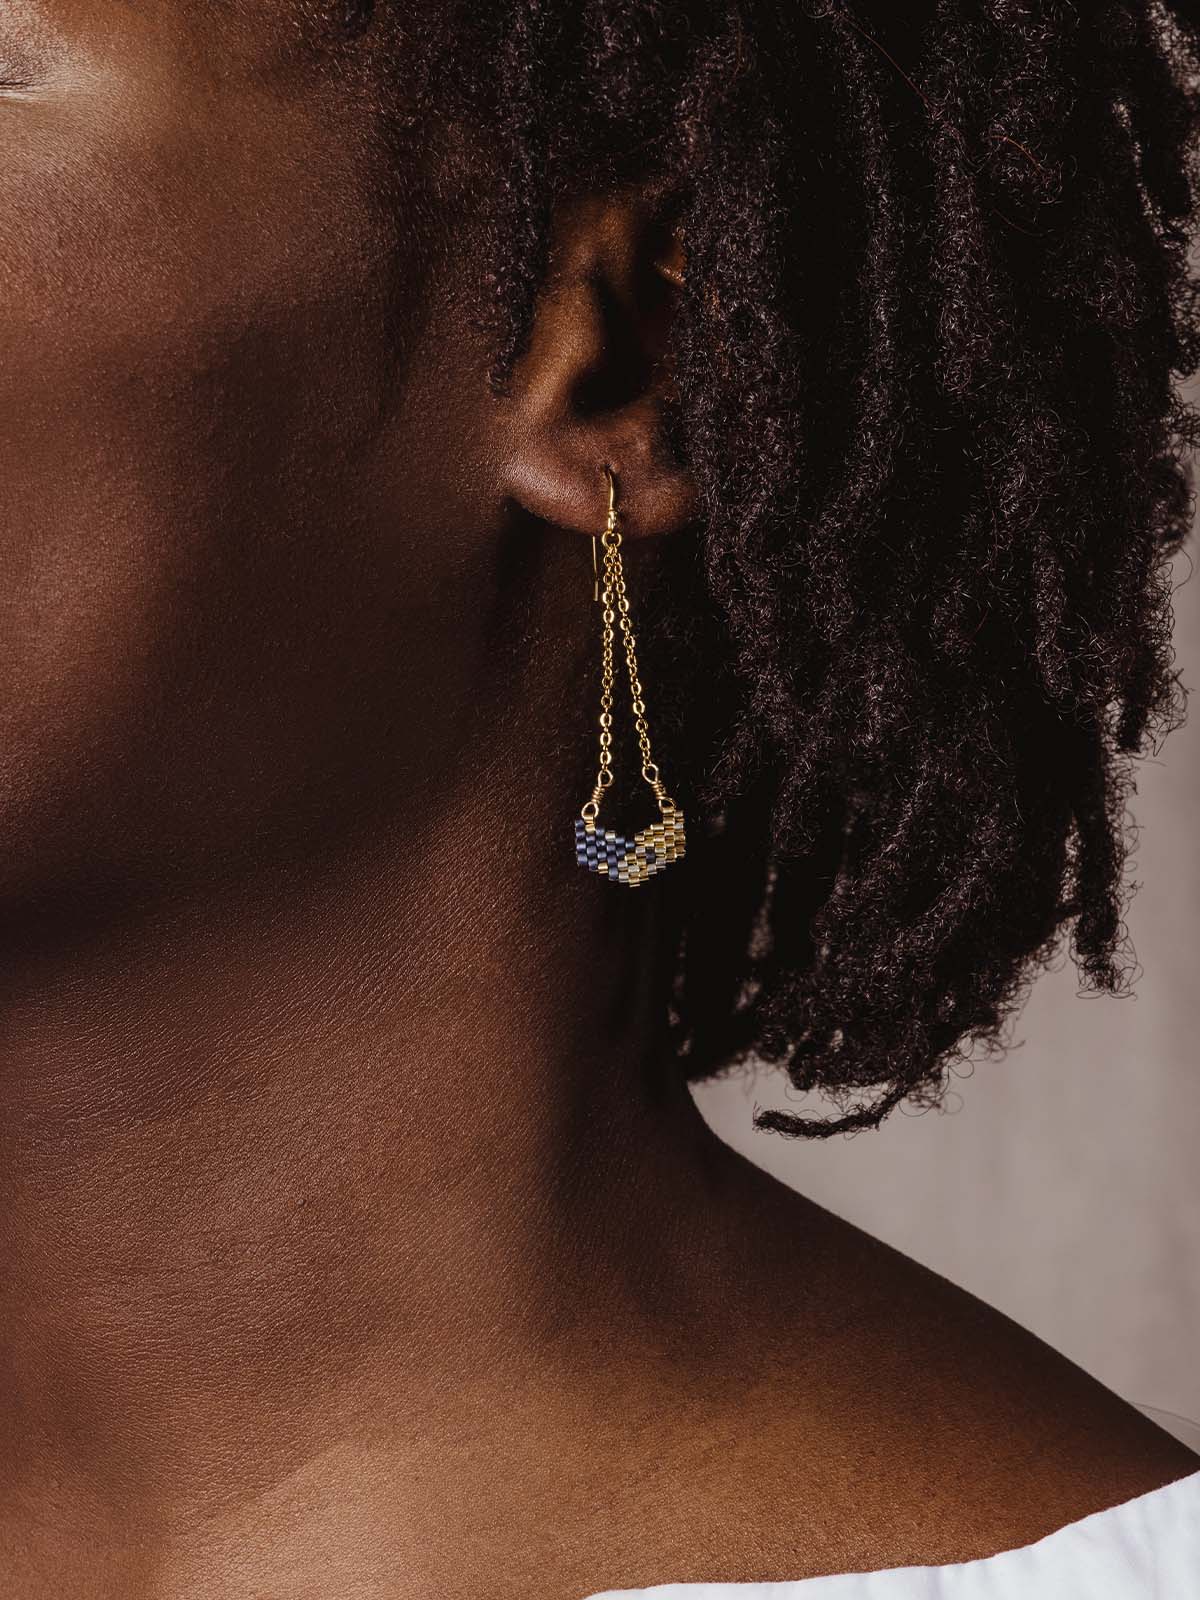 Model wearing gold and blue earrings with beaded pendants